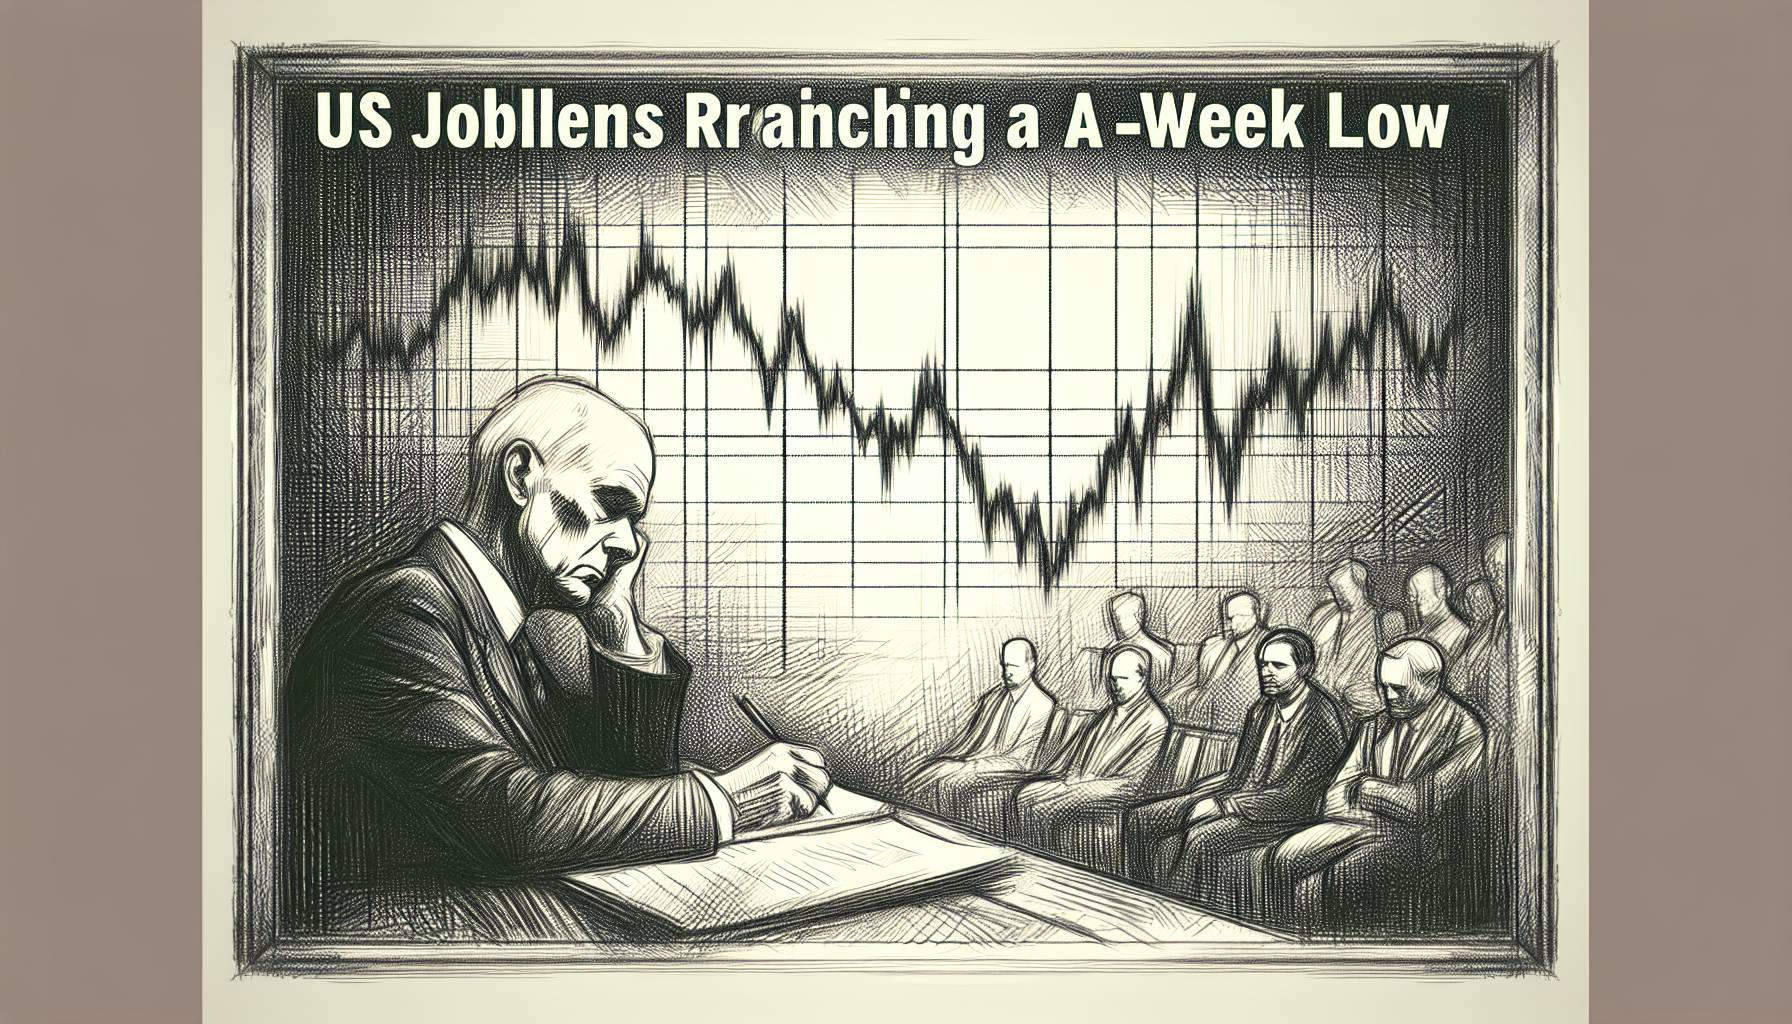 "Jobless Claims Drop"